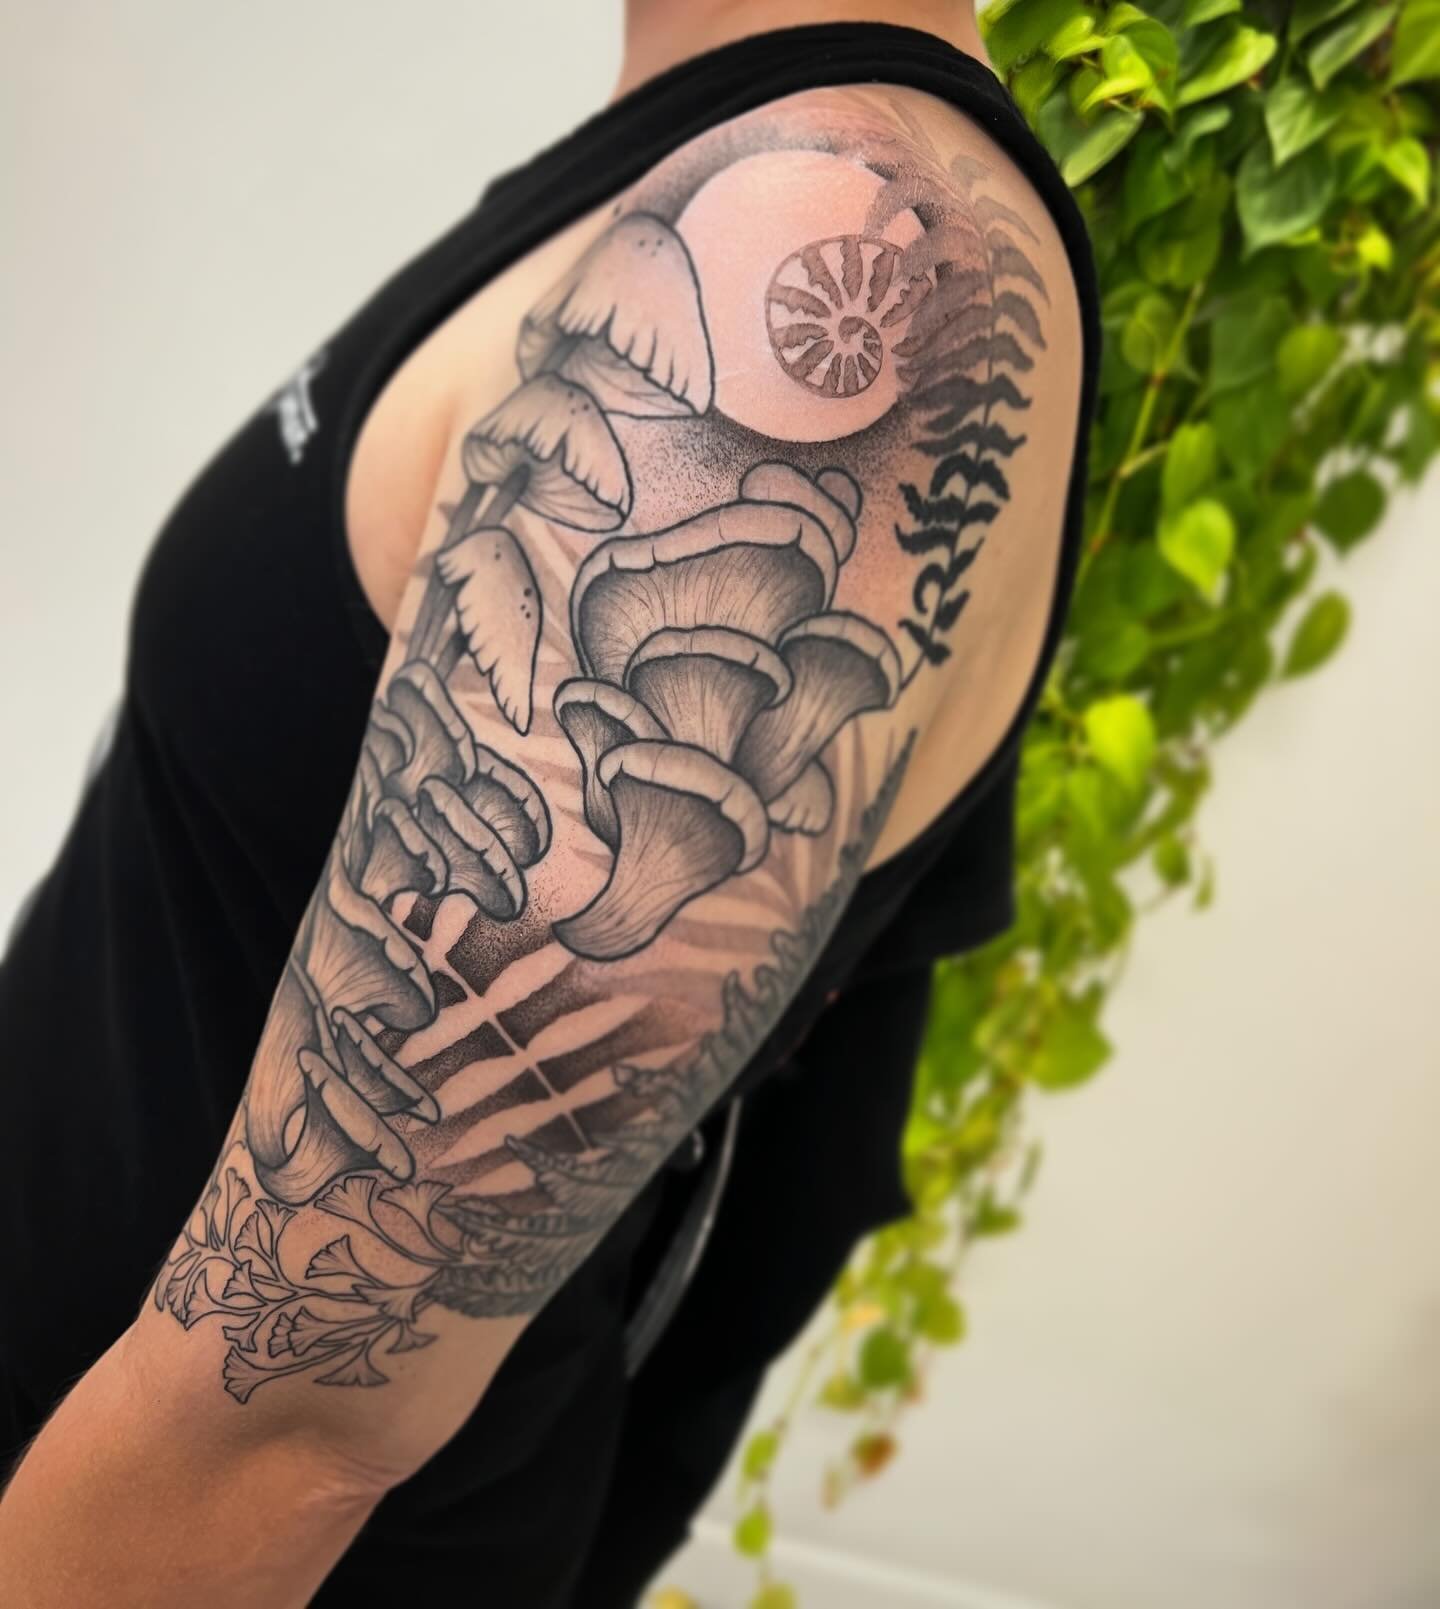 Thanks K - finished up the filler on this arm this week! 
&bull;
&bull;
&bull;
#chicago #skinabrasions #midwesttattoos #skinabrasionstattoo #midwestartist #illinoisartist #midwesttattooartist #oakparkartist #oakpark #chicagotattooartist #chicagoartis